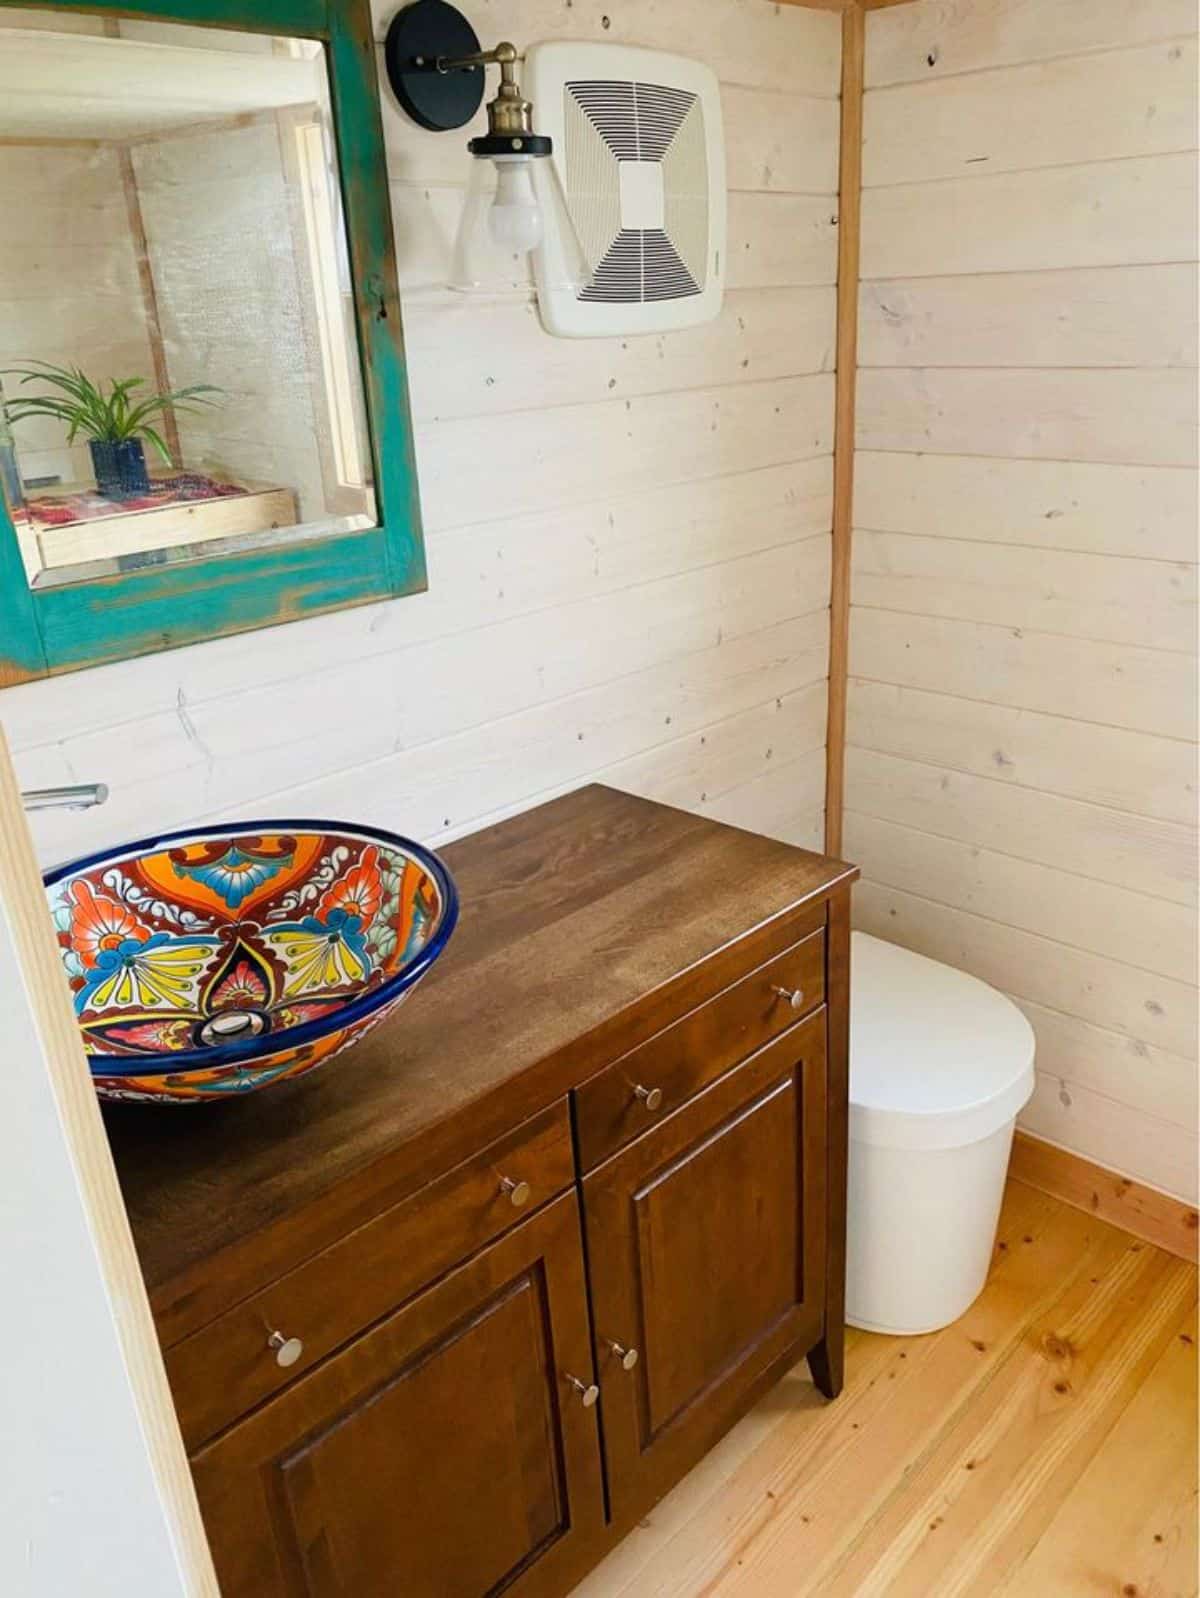 bathroom of chic tiny home has all the standard fittings and composting toilet